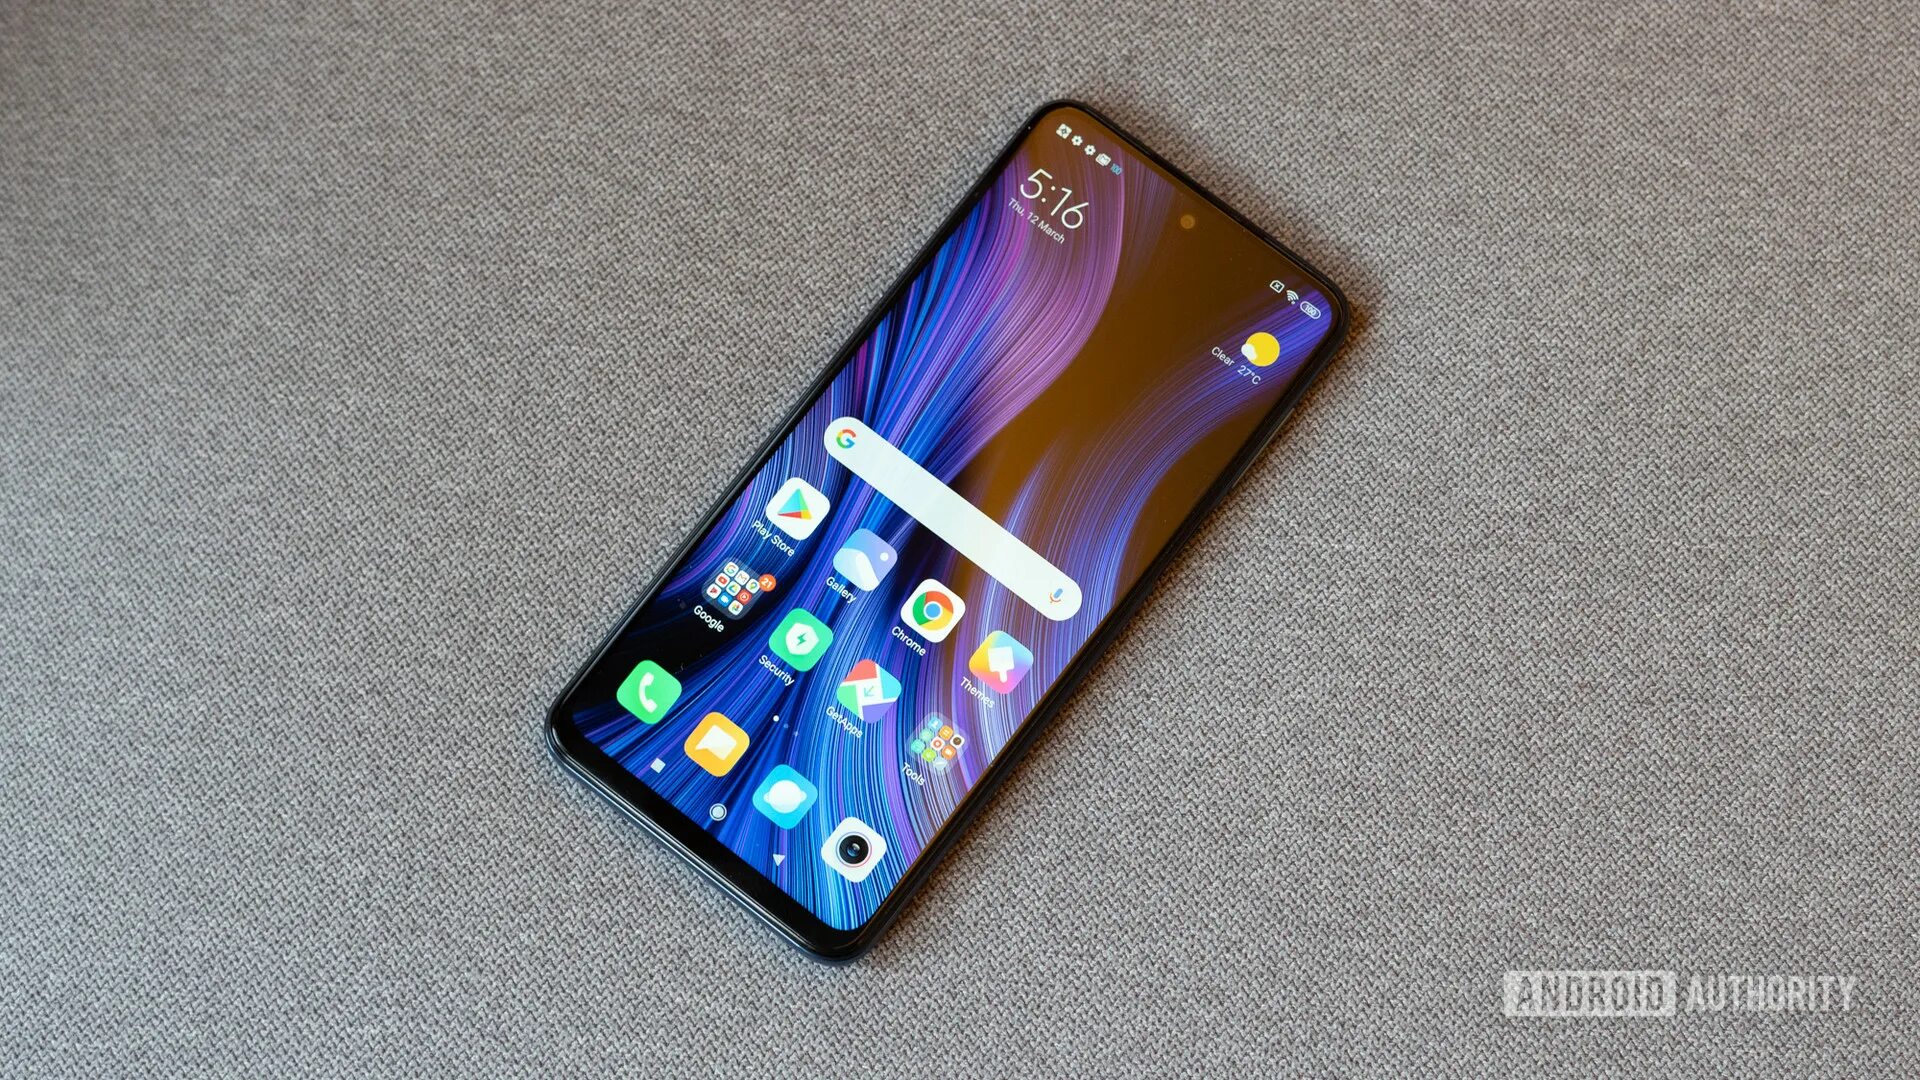 Xiaomi Redmi Note 9 Pro. Xiaomi Redmi Note 9. Xiaomi Redmi Note 9s. Редми ноут 9 s. Redmi note 9 4 128